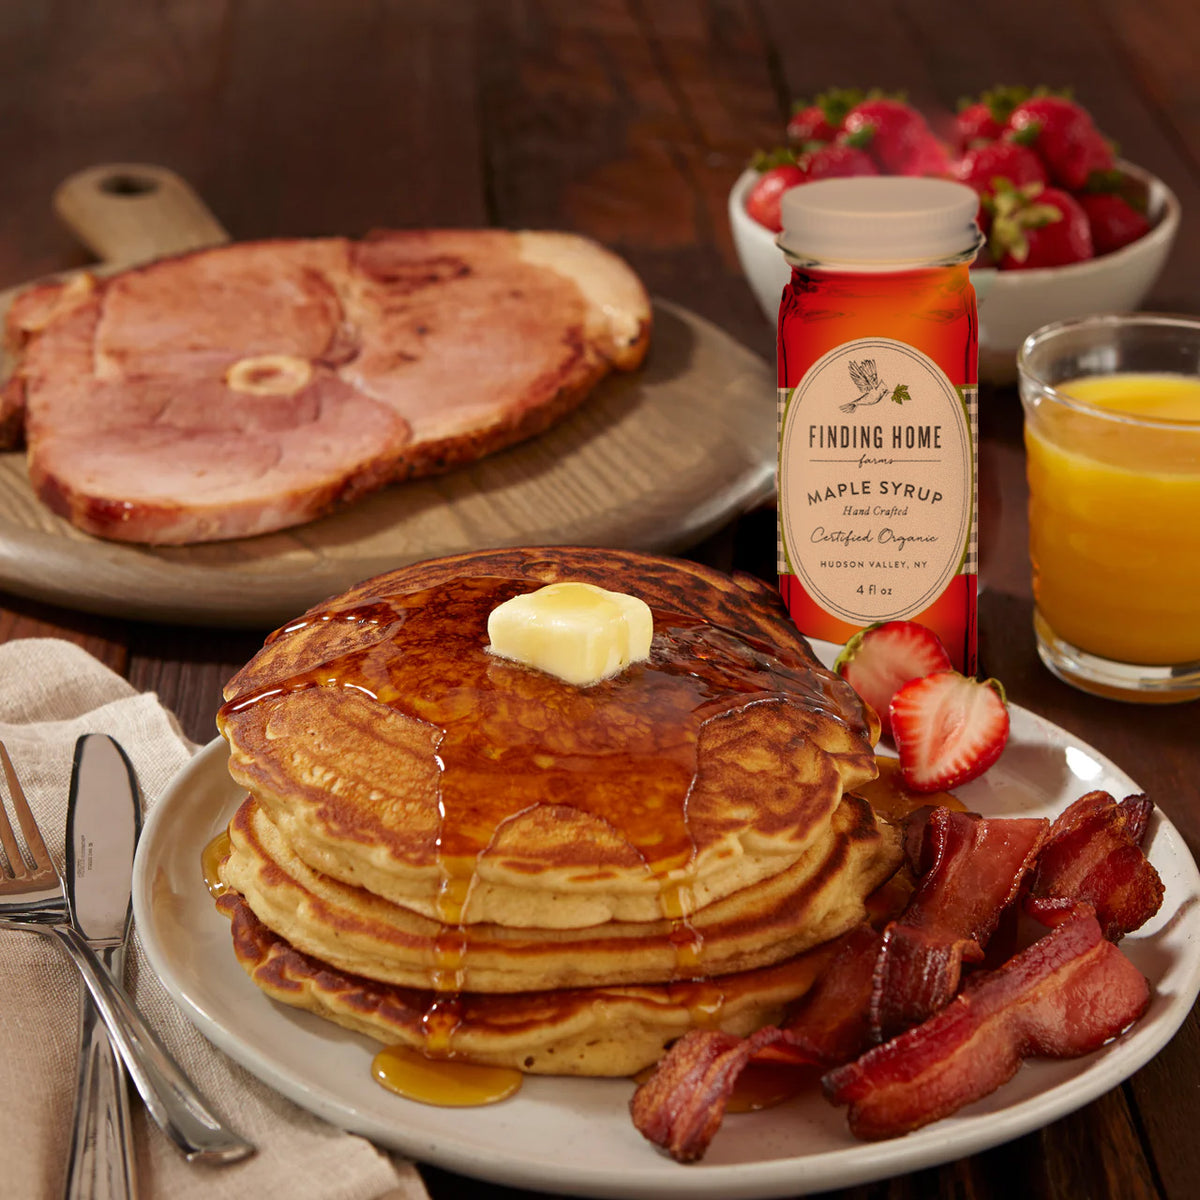 A breakfast layout showing pancakes, smoked bacon, ham steak, maple syrup and orange juice.